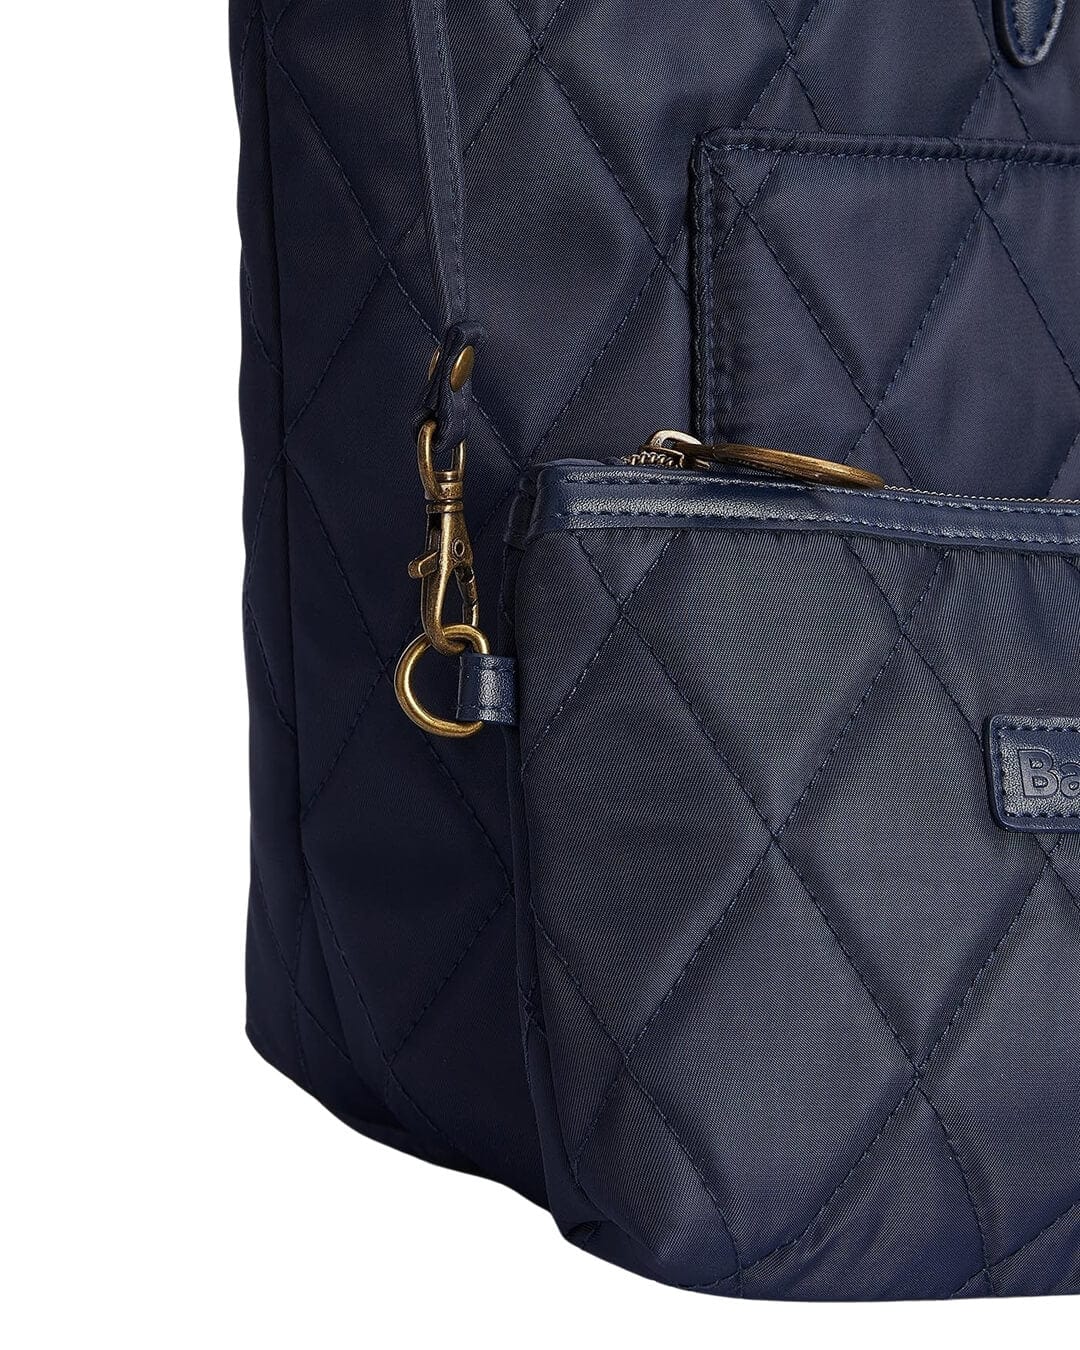 Barbour Bags ONE QUILTED TOTE BAG NY31 NAVY SS24